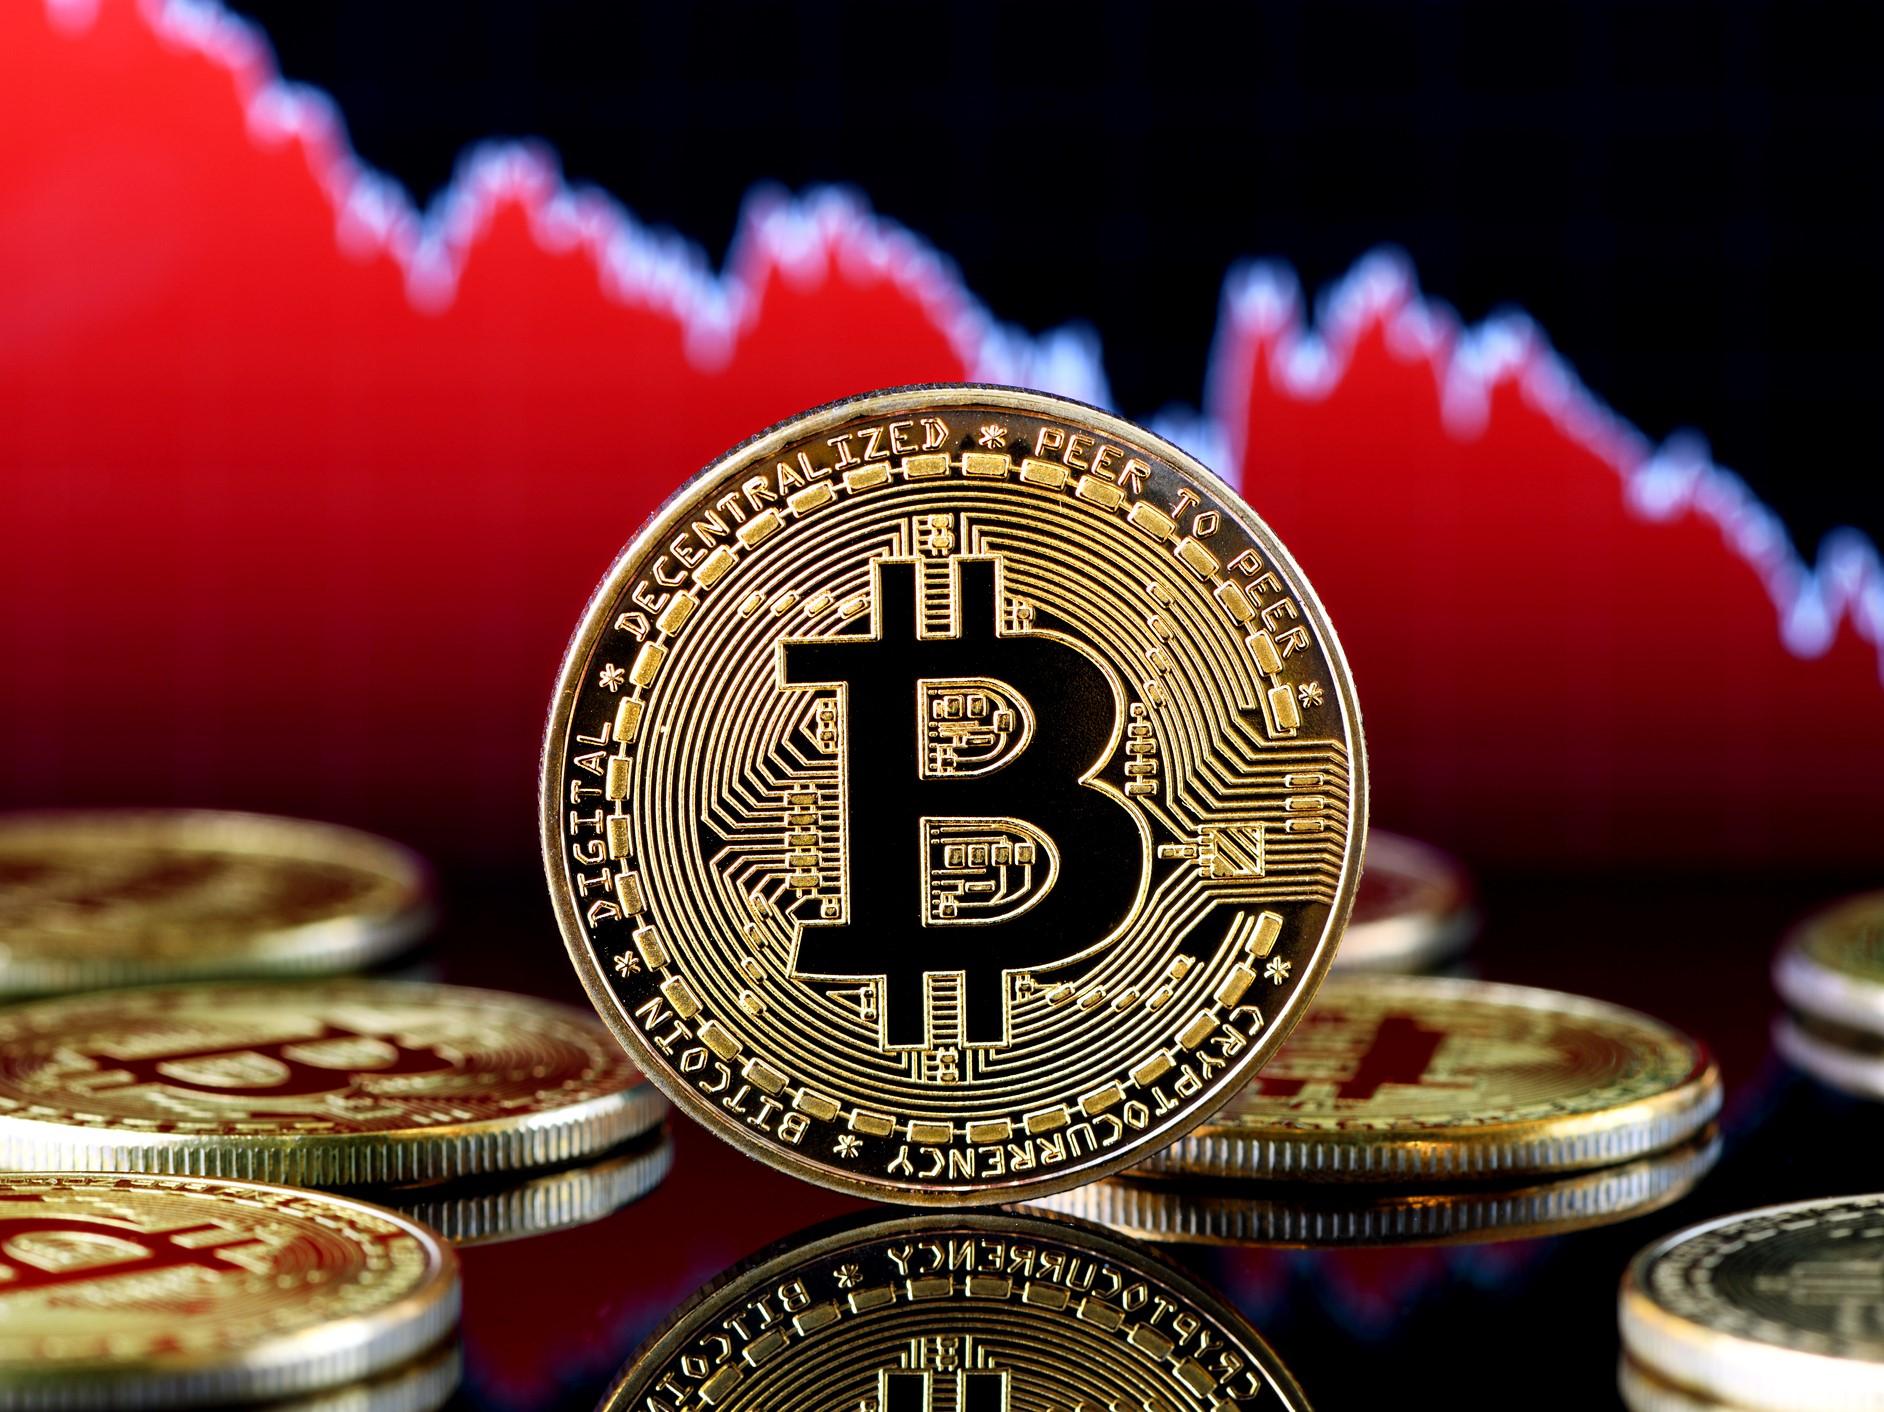 Bitcoin investors are keeping a close eye on Halving and price action